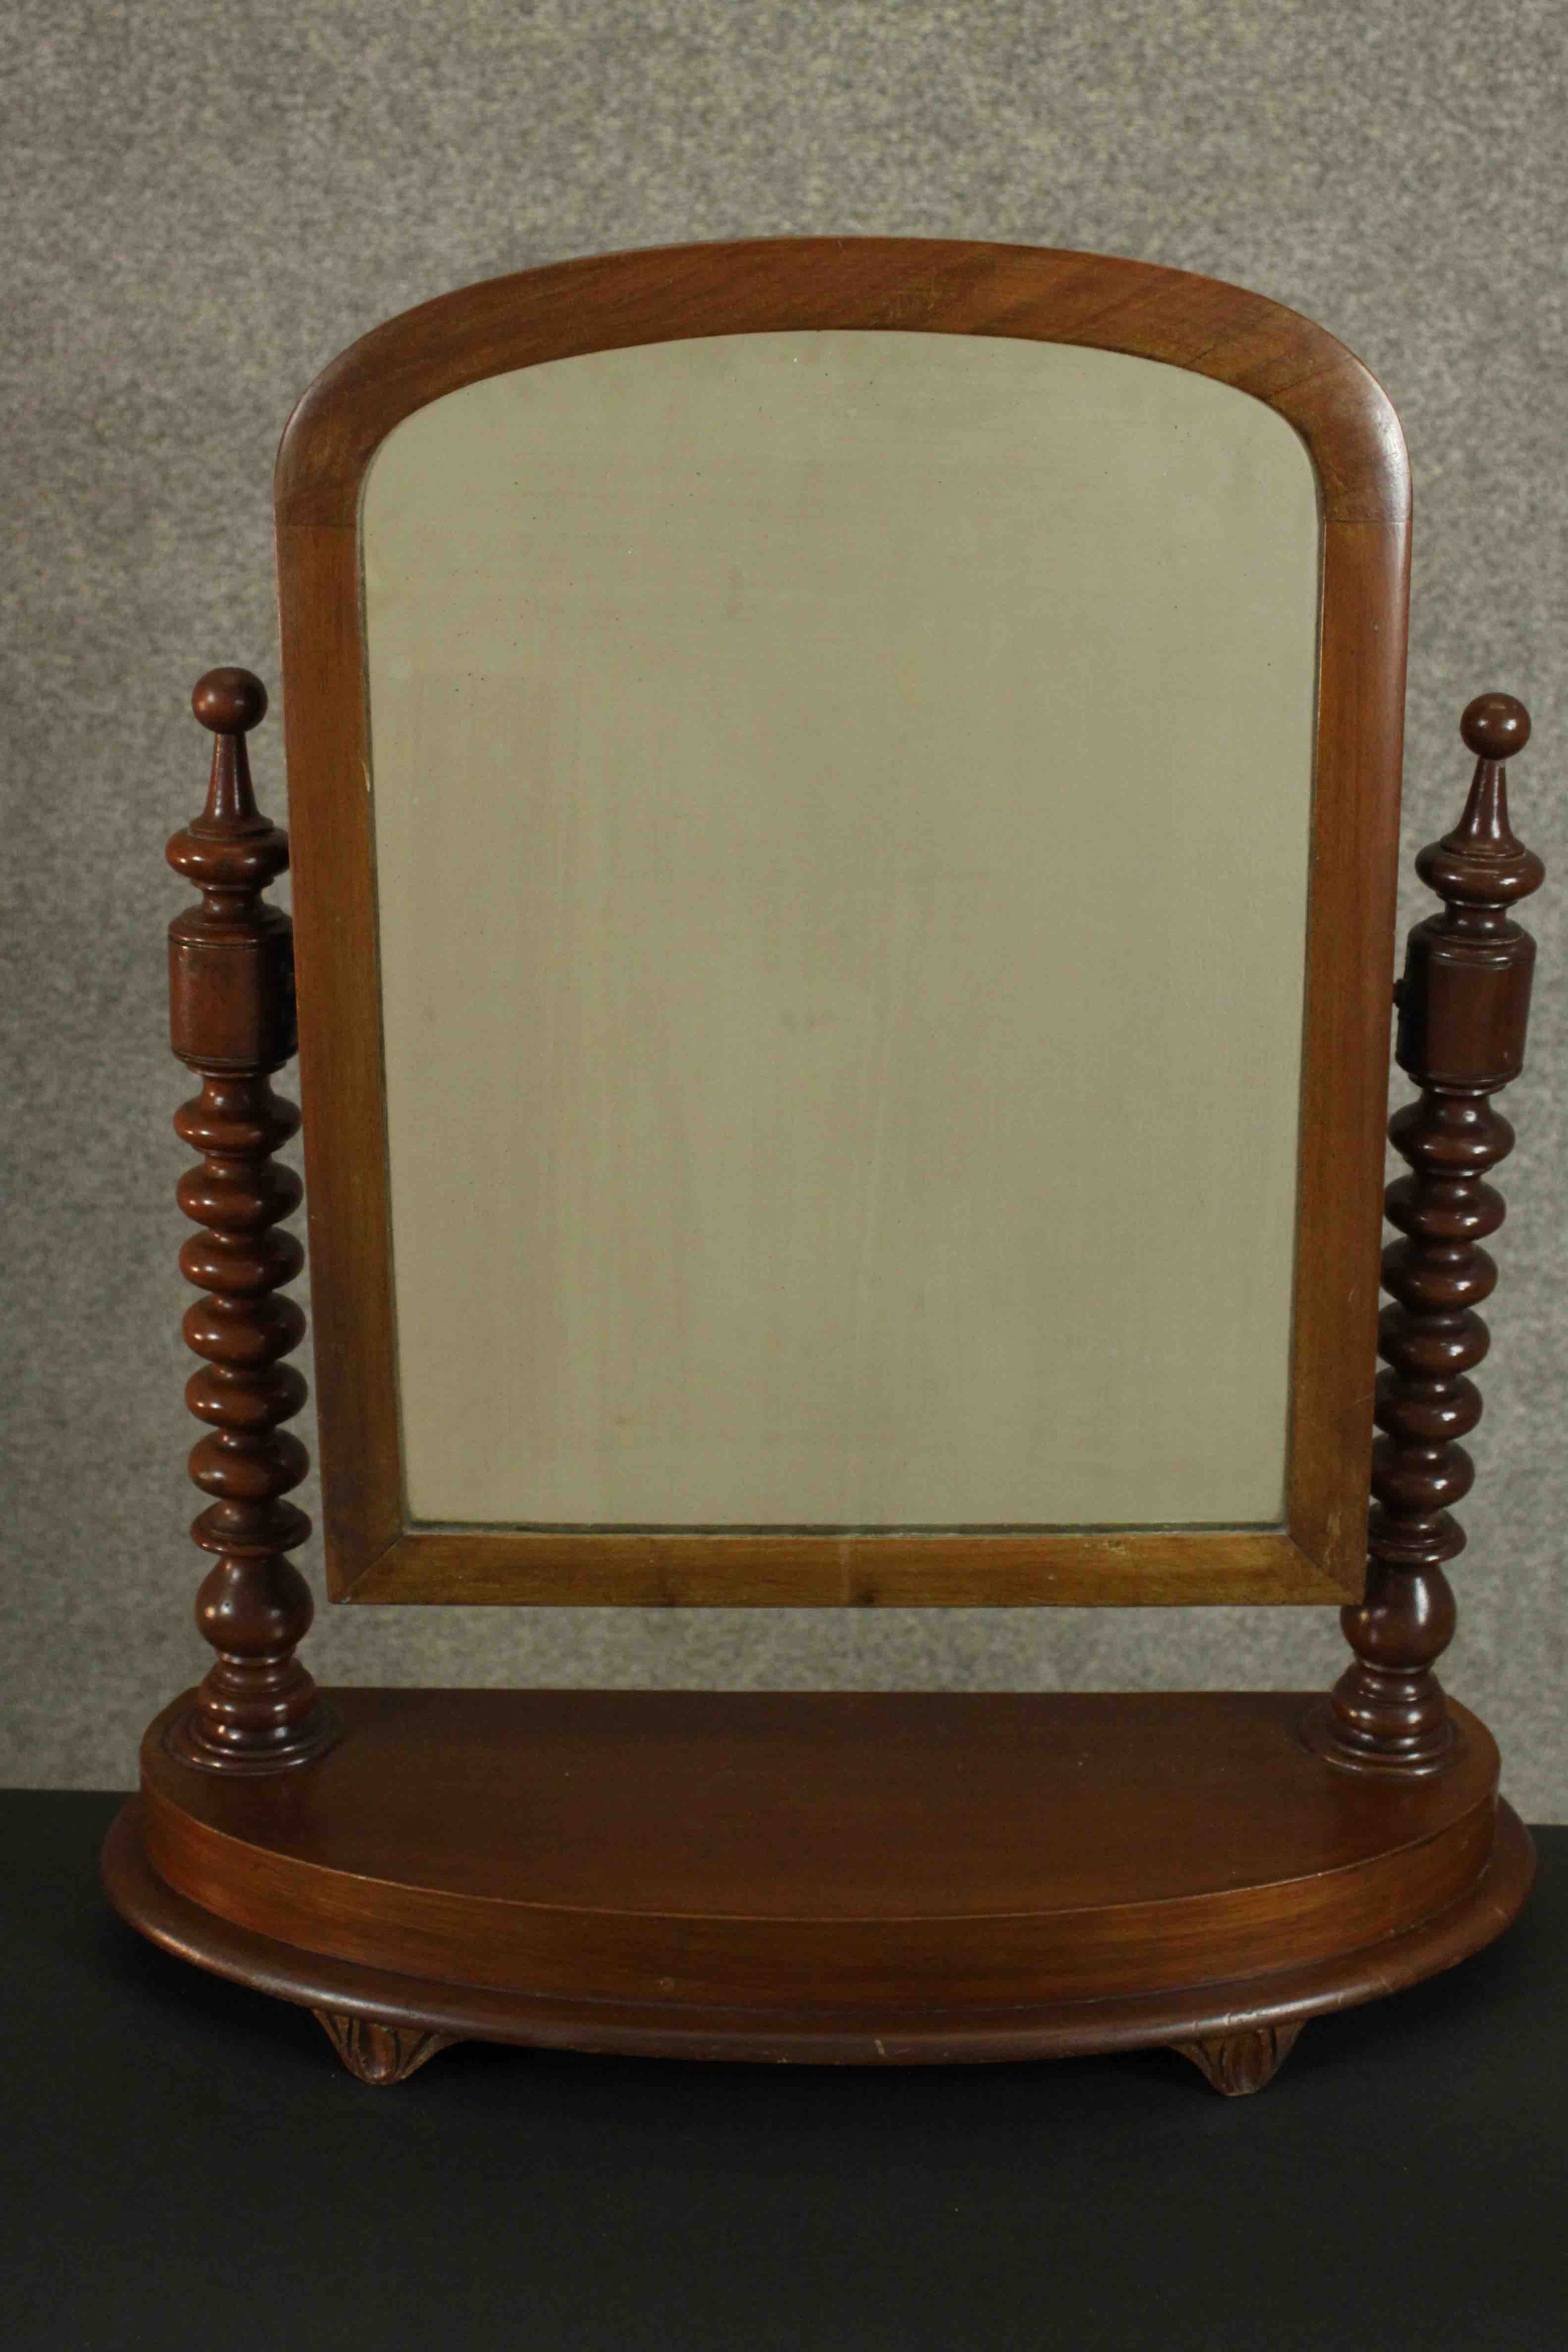 A Victorian walnut dressing table or toilet mirror, of rounded arch form supported by bobbin